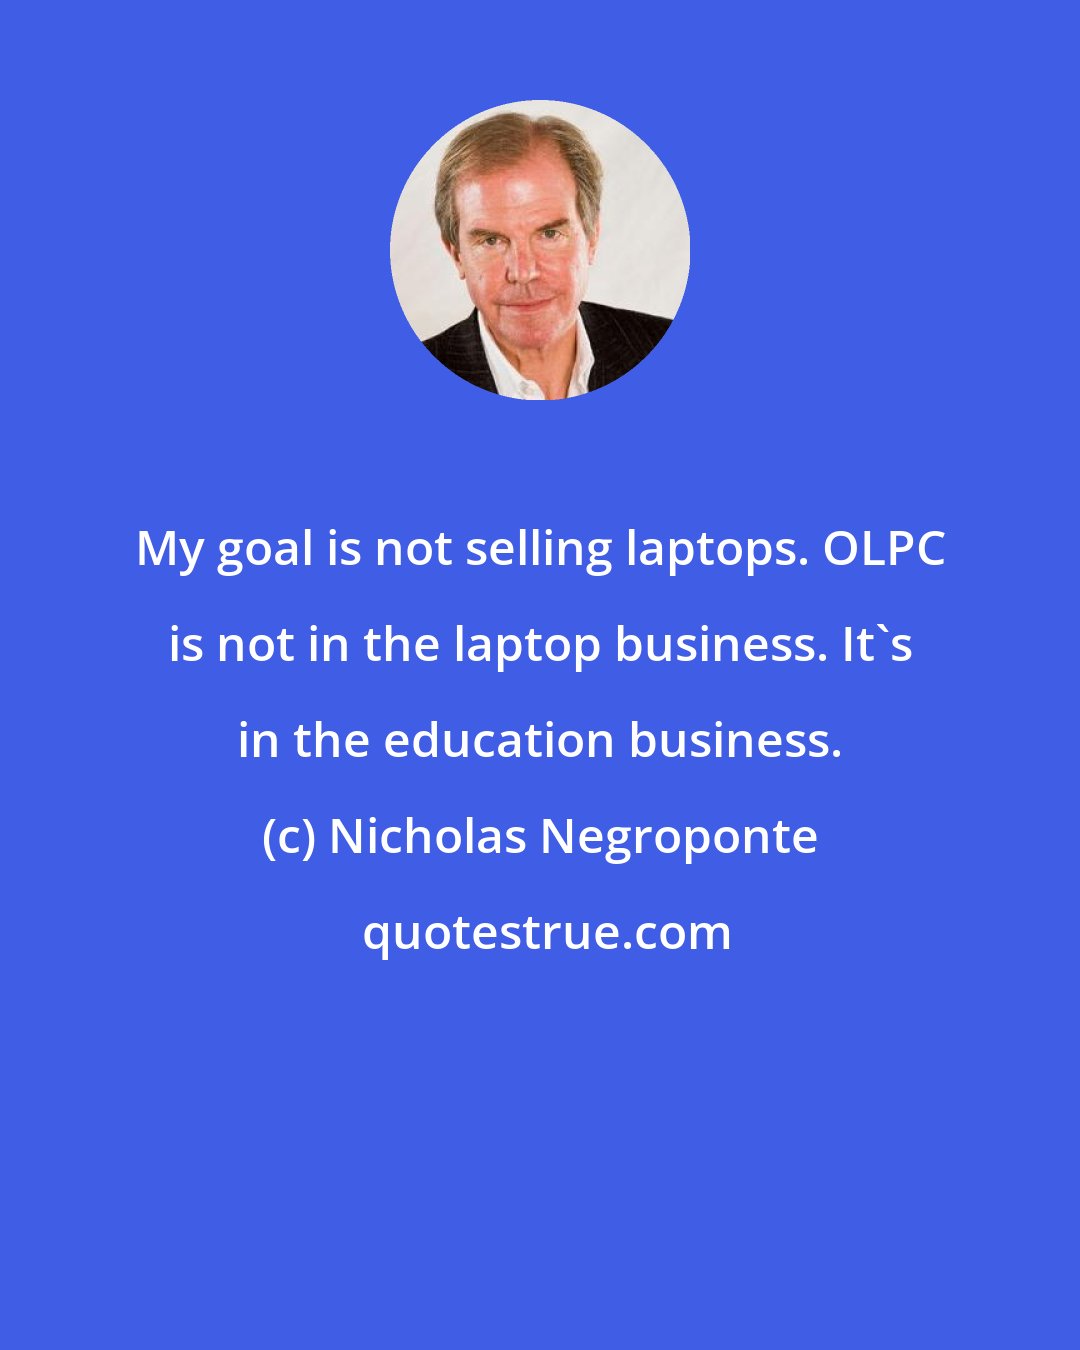 Nicholas Negroponte: My goal is not selling laptops. OLPC is not in the laptop business. It's in the education business.